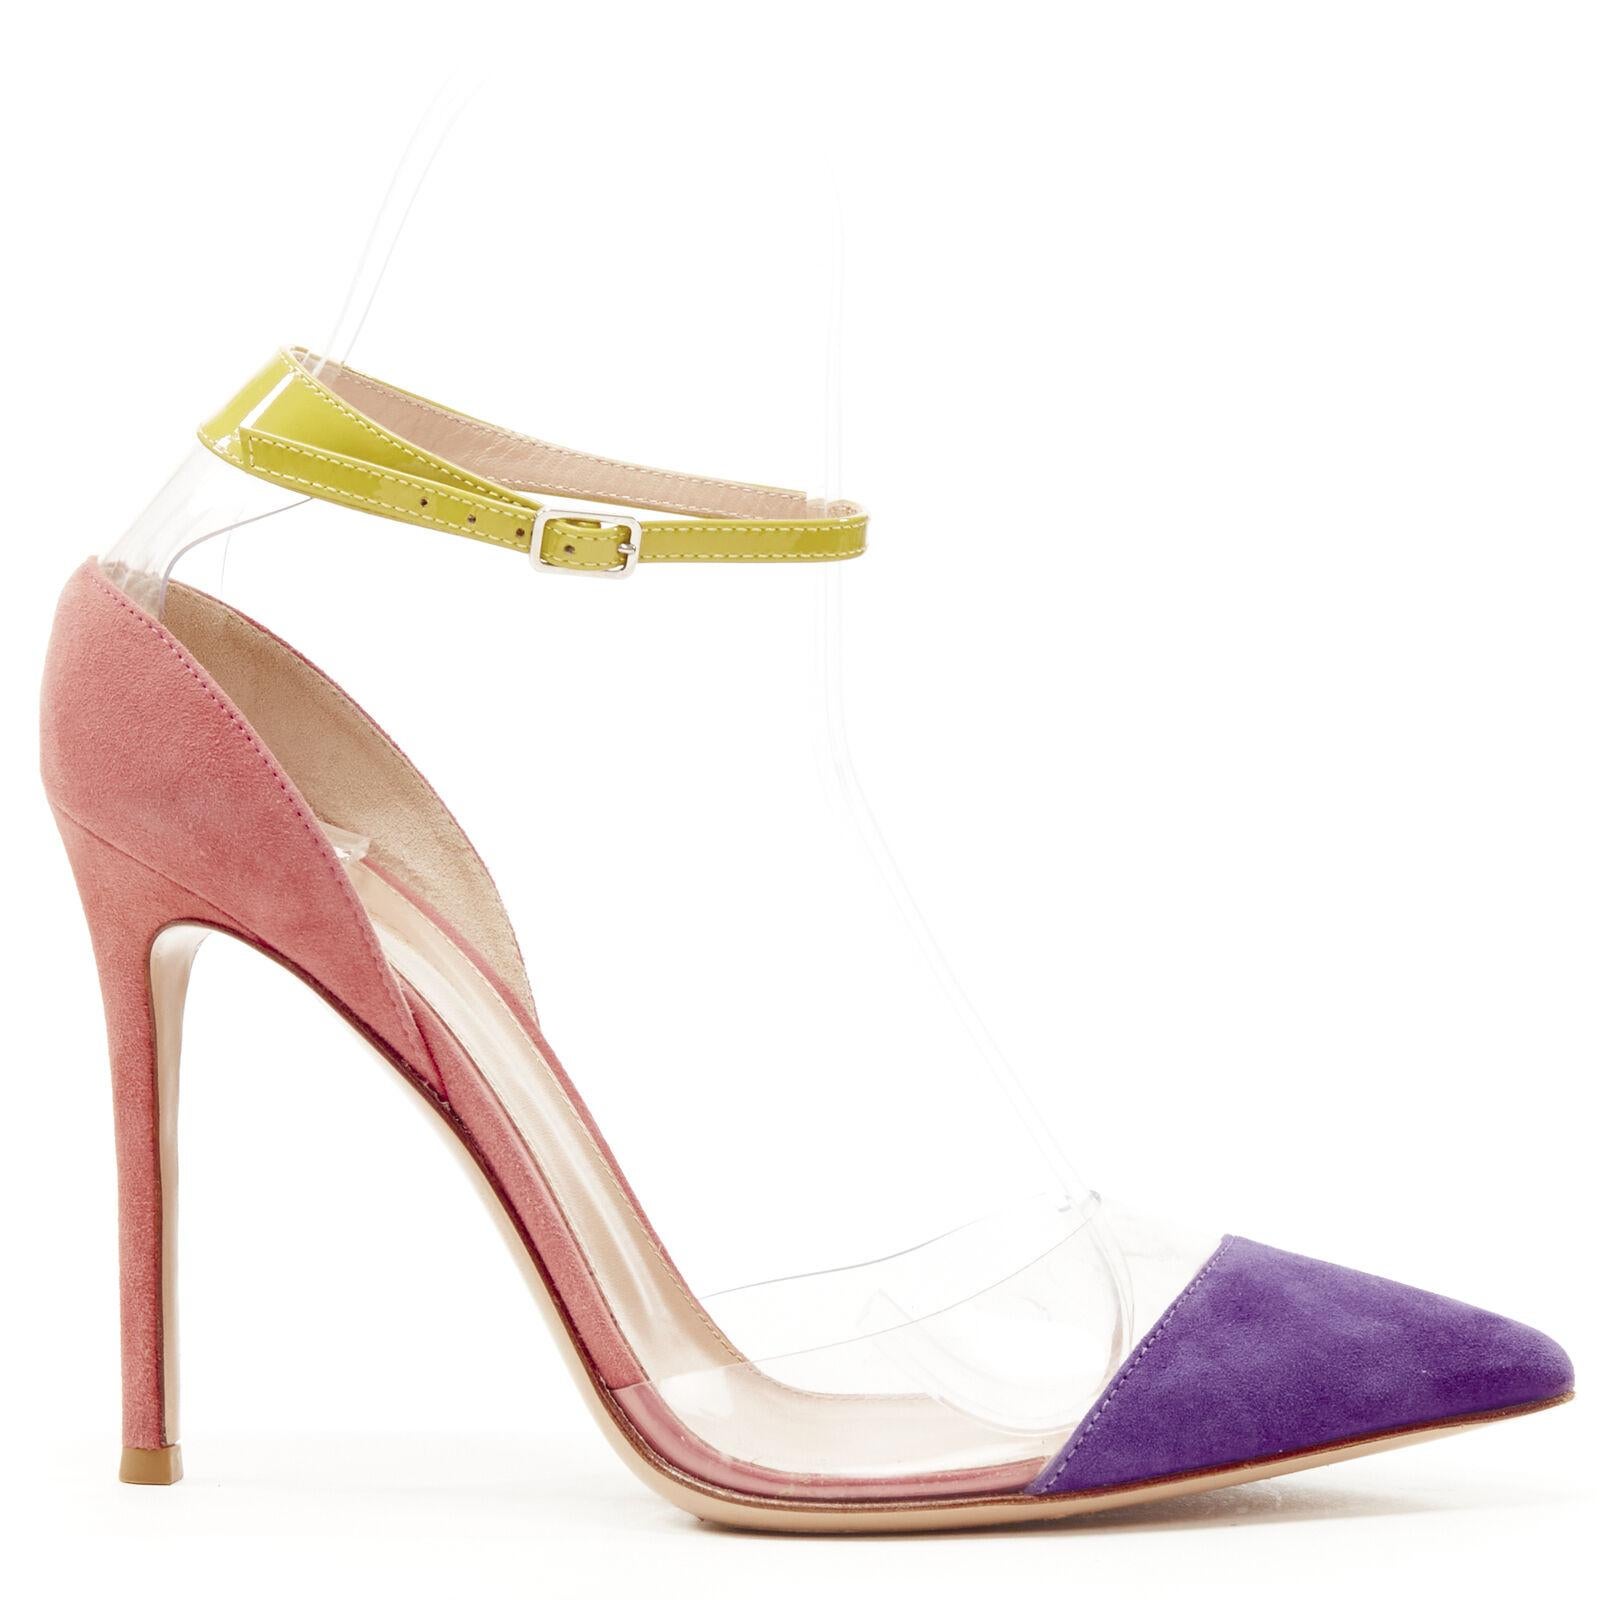 GIANVITO ROSSi Plexi purple pink suede yellow ankle strap PVC pump EU38
Reference: KEDG/A00134
Brand: Gianvito Rossi
Model: Plexi
Material: PVC, Suede
Color: Purple, Pink
Pattern: Solid
Closure: Ankle Strap
Lining: Leather
Made in: